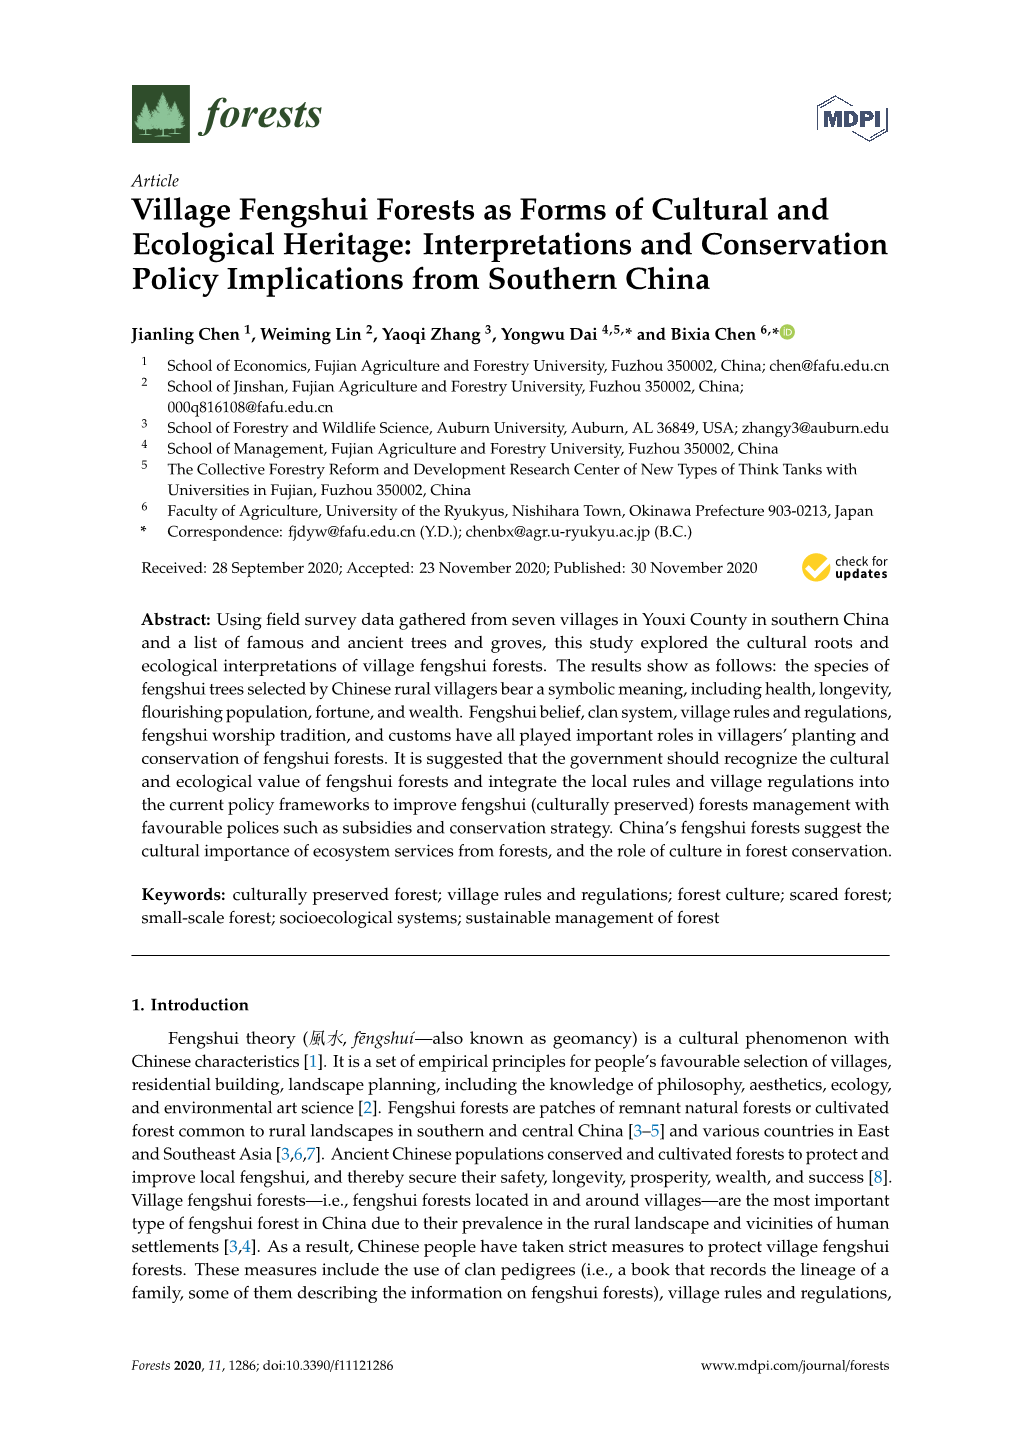 Village Fengshui Forests As Forms of Cultural and Ecological Heritage: Interpretations and Conservation Policy Implications from Southern China